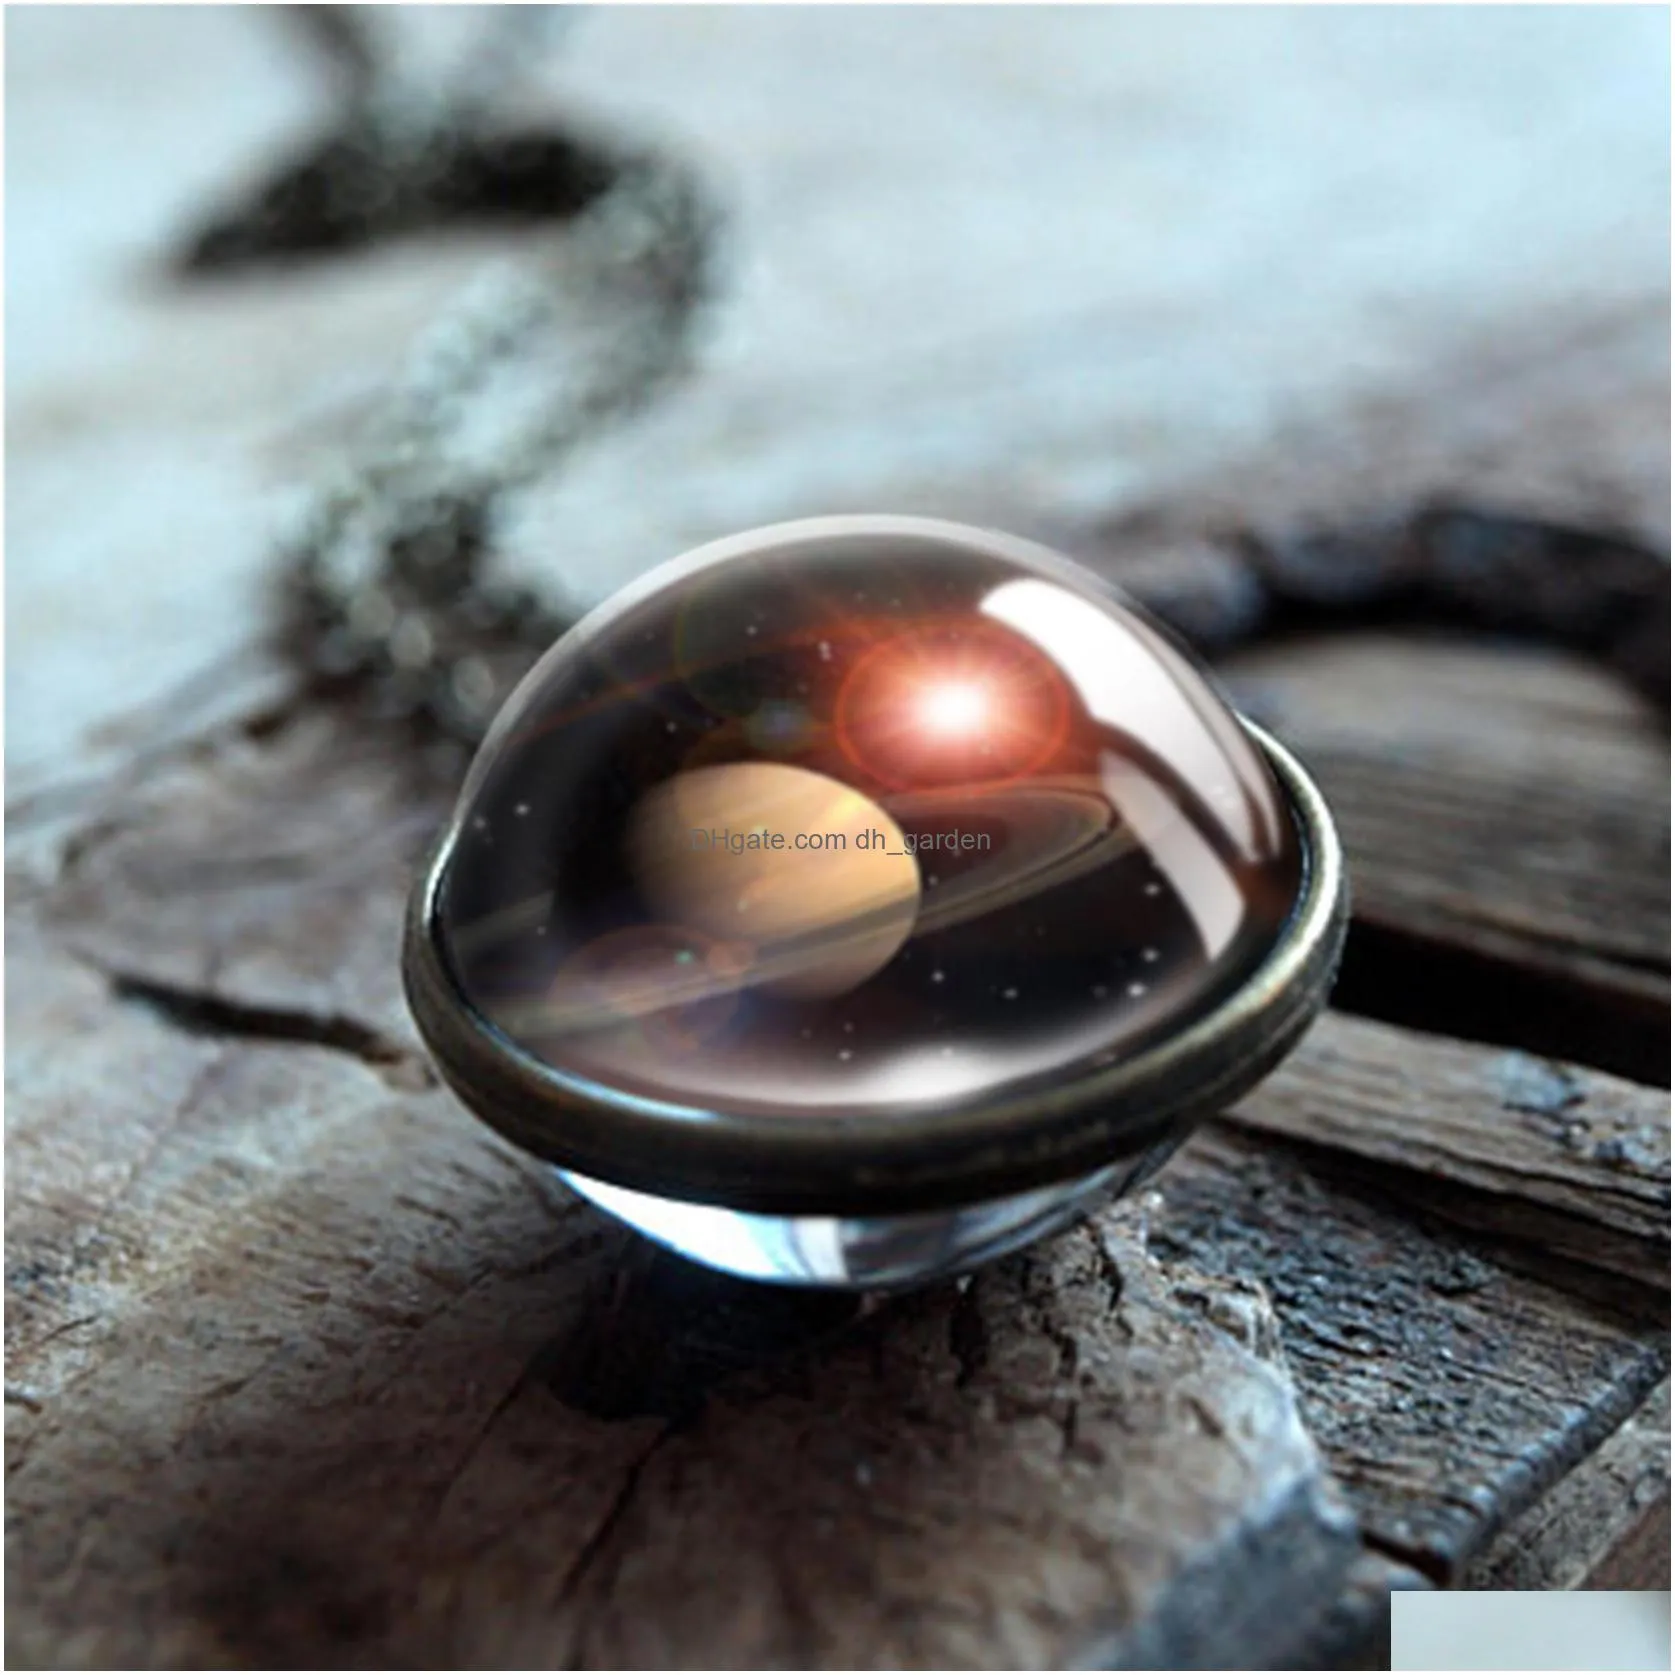  nebula galaxy double sided rotatable necklaces for wome men universe planet glass art picture pendant handmade statement jewelry in